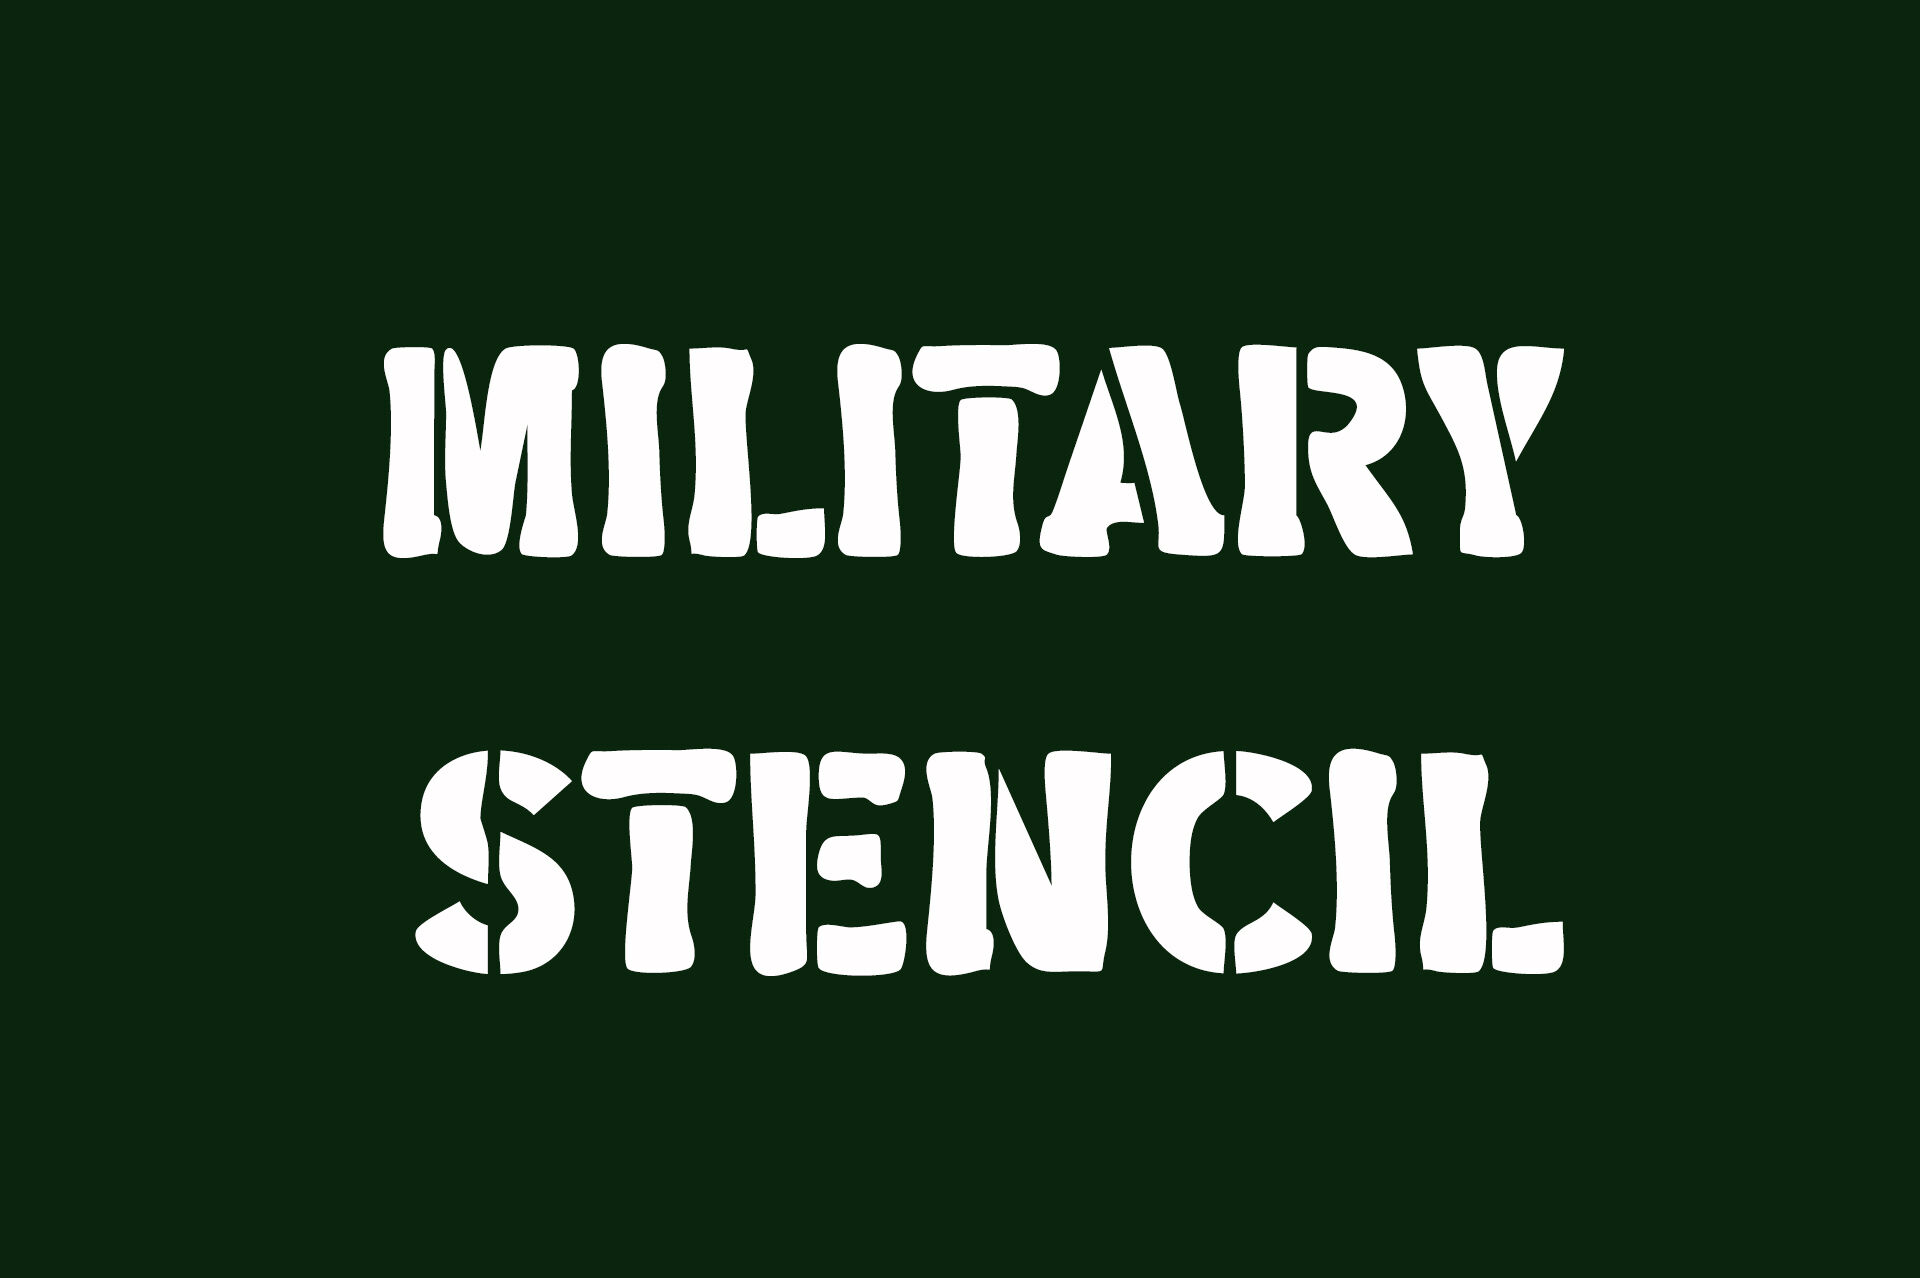 Military Stencil Font By Ampersand Thehungryjpeg